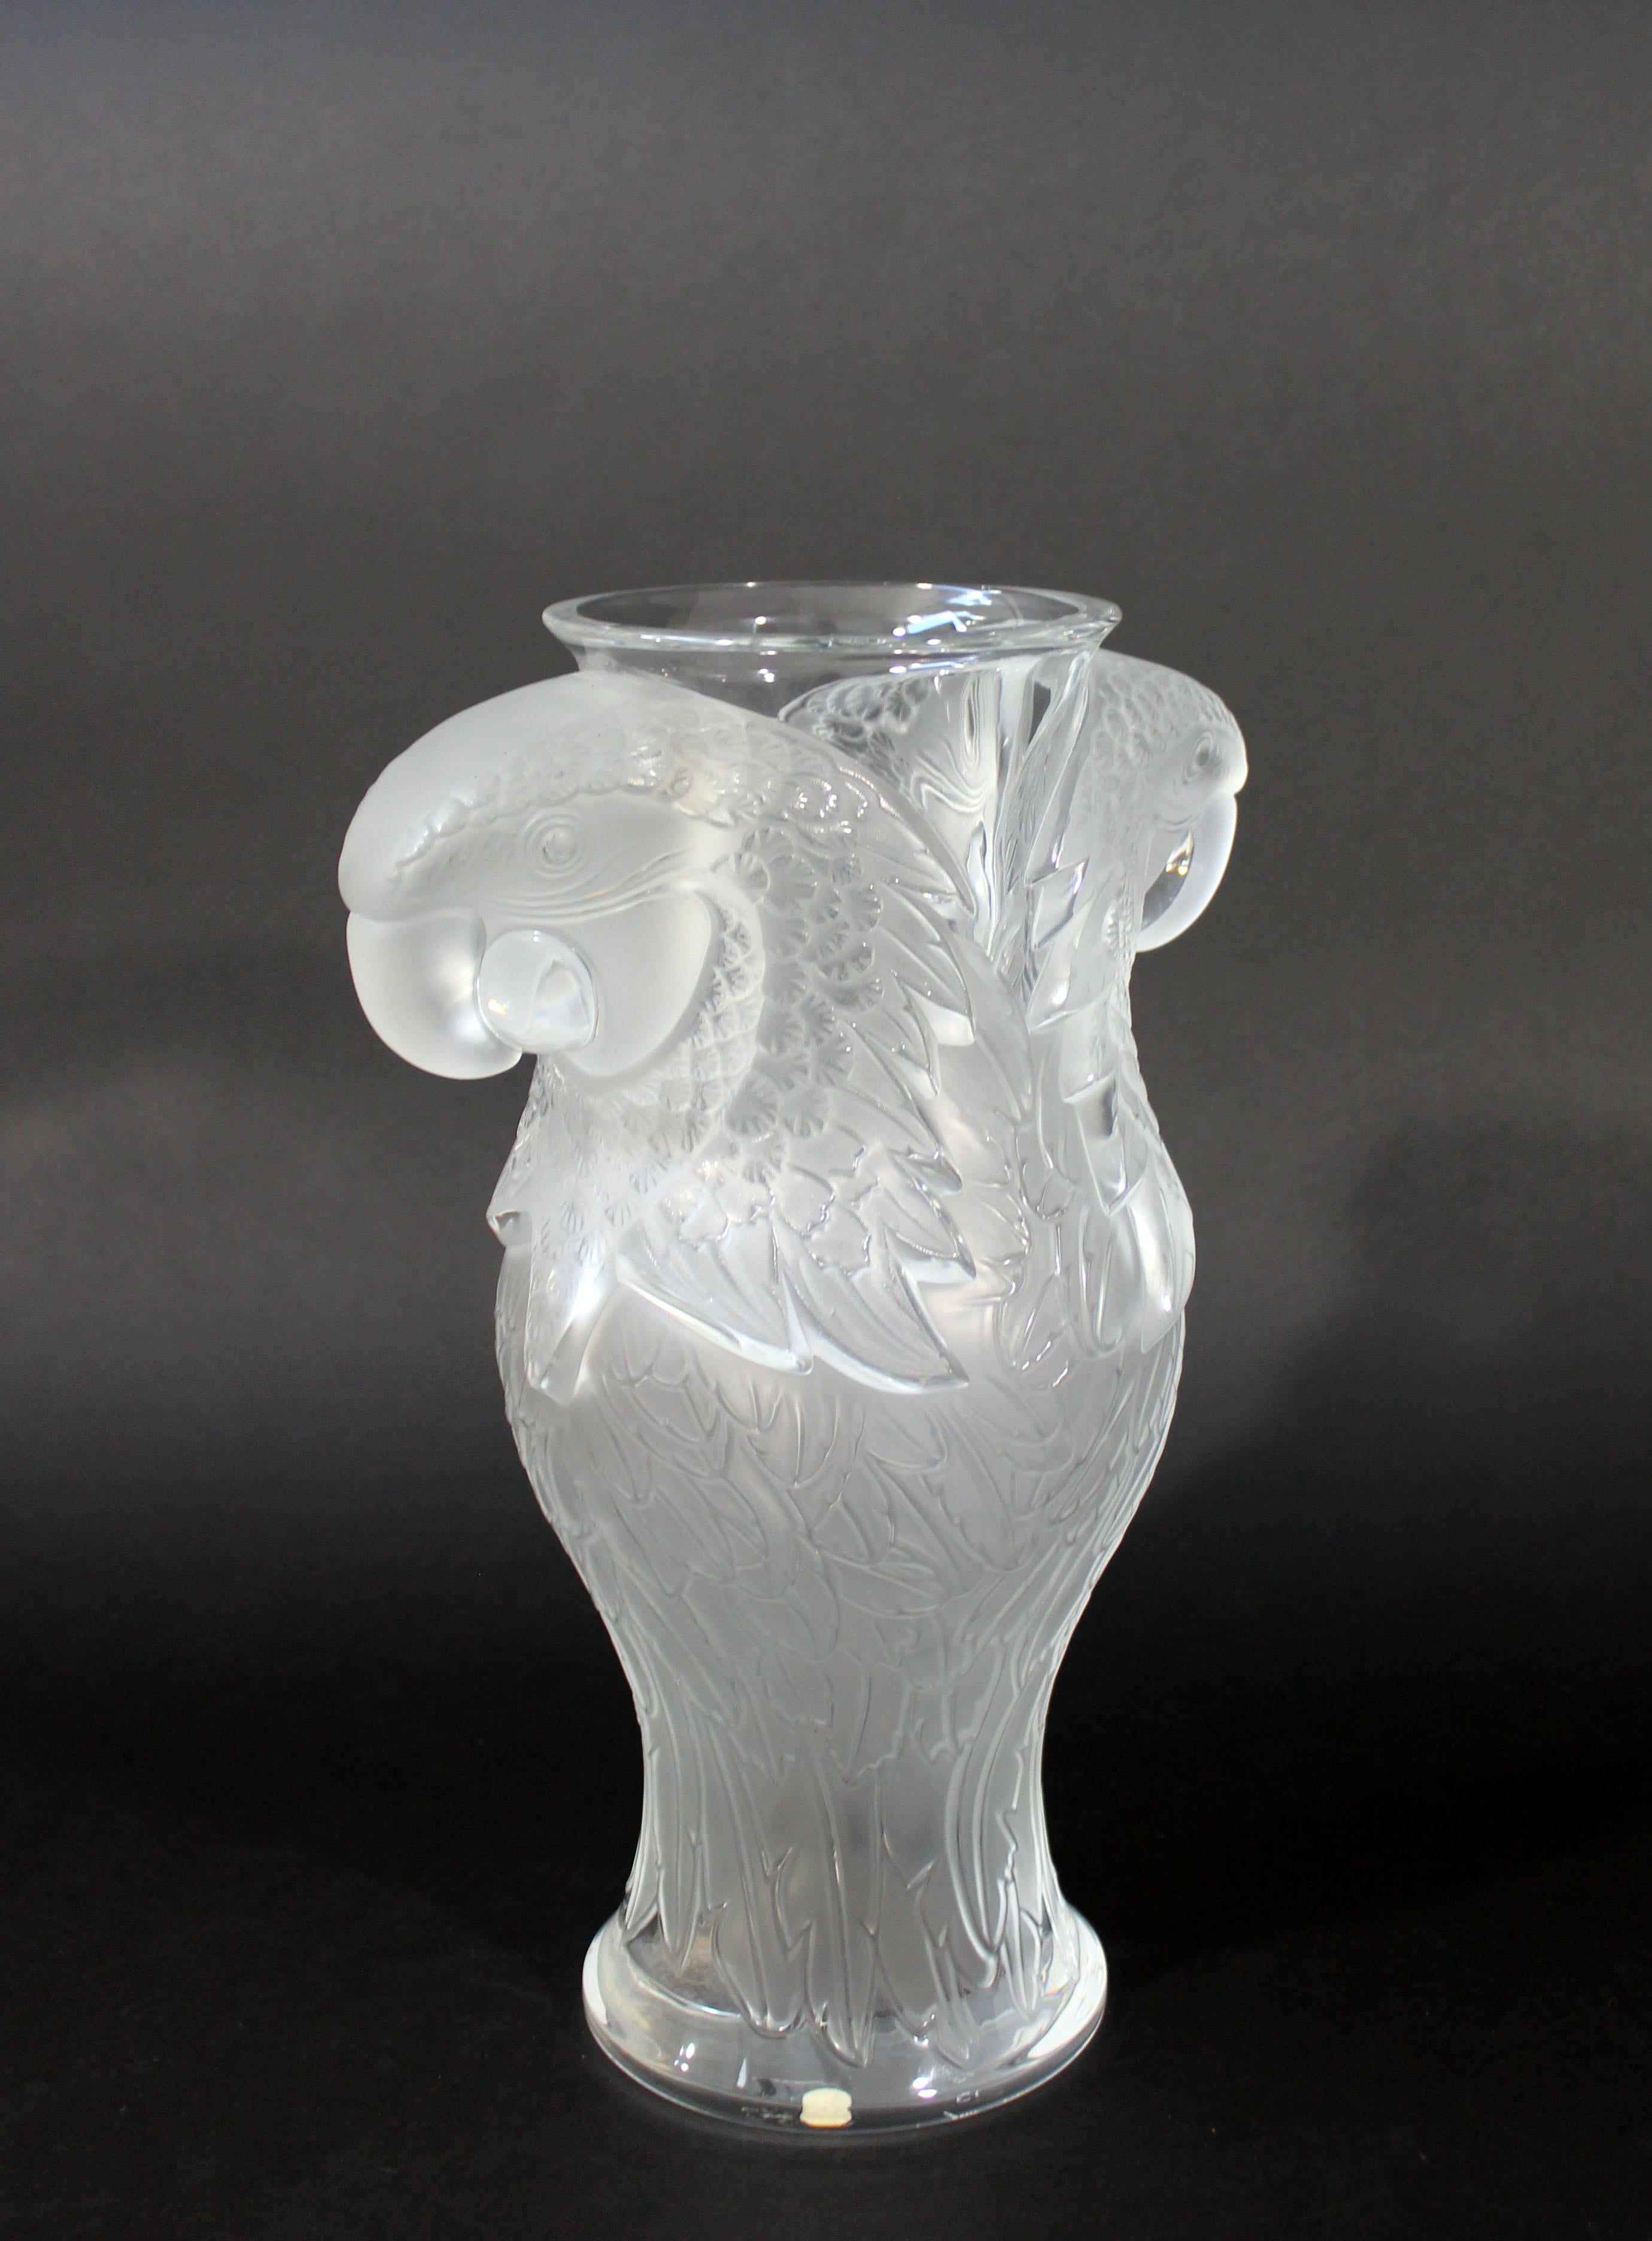 Late 20th Century Contemporary Lalique France Crystal Glass Macao Macaw Vase Table Sculpture